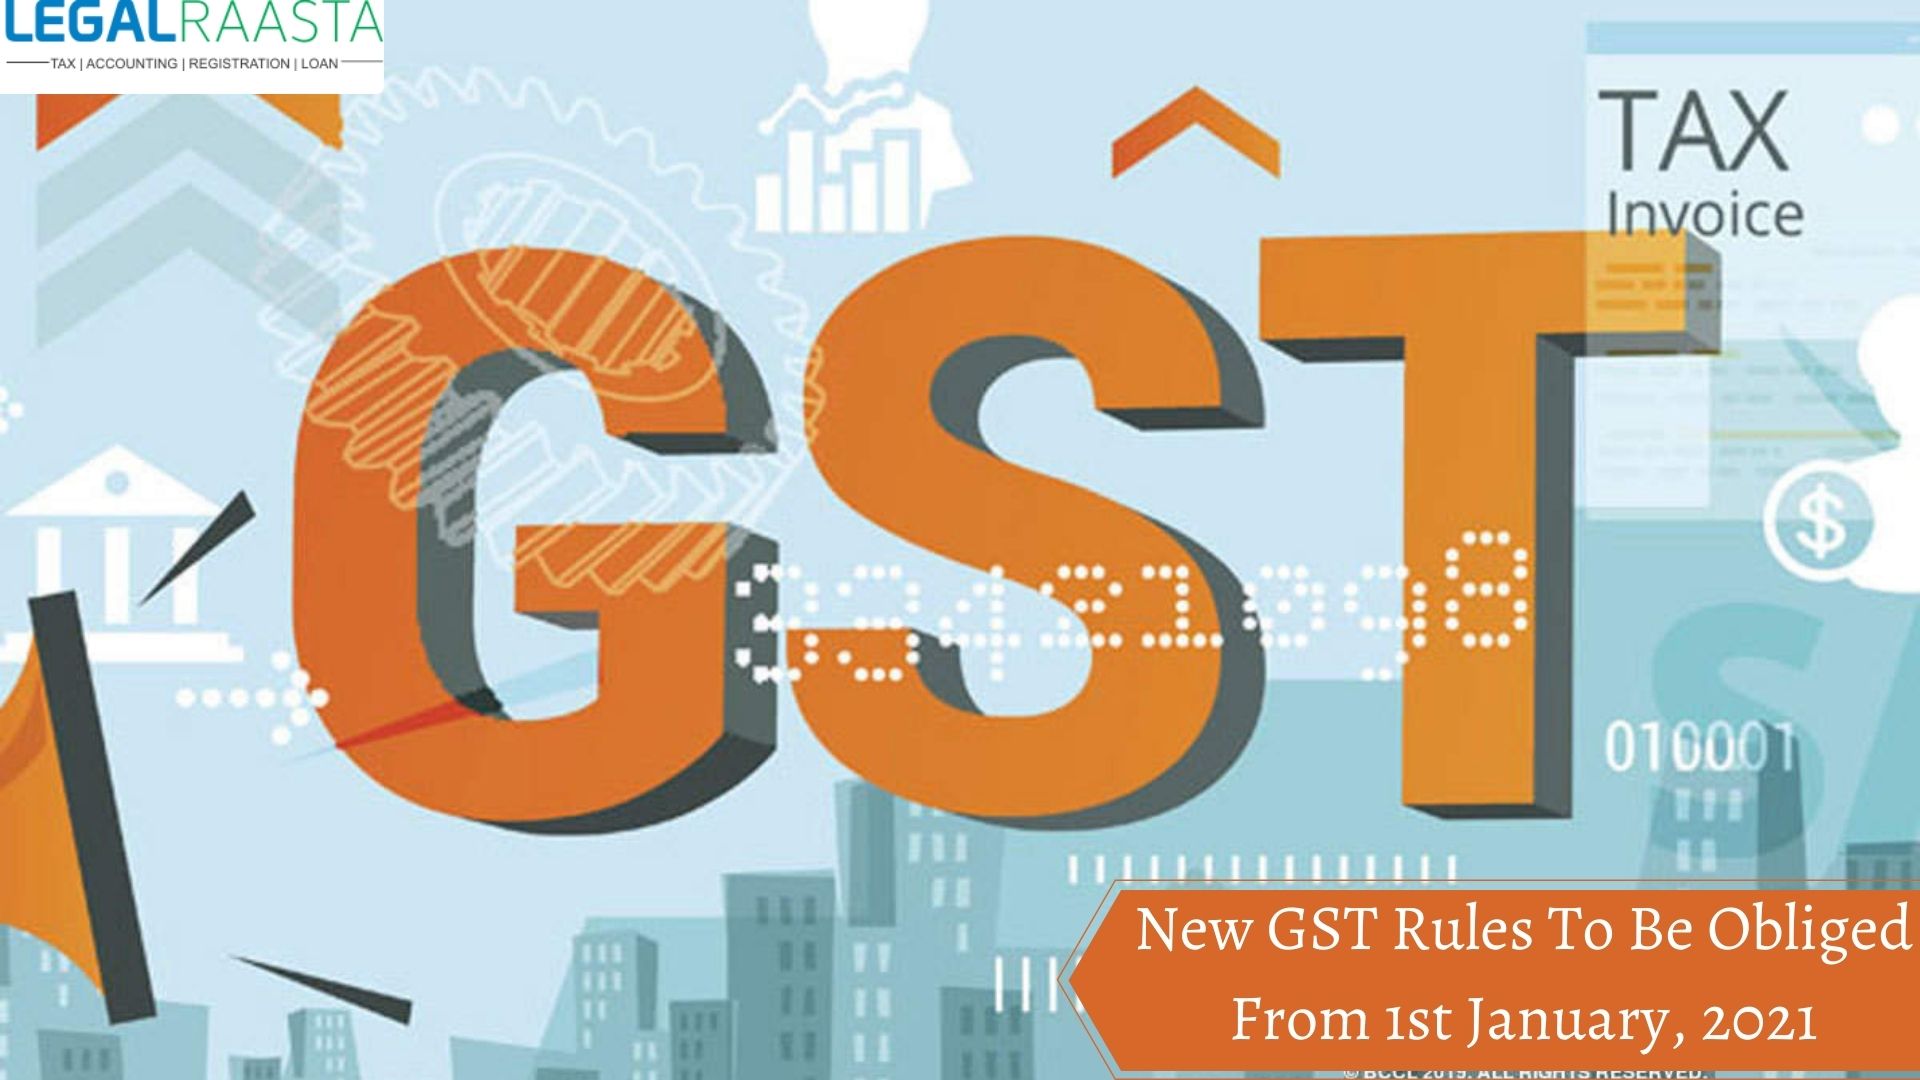 New GST Rules To Be Obliged From 1st January, 2021